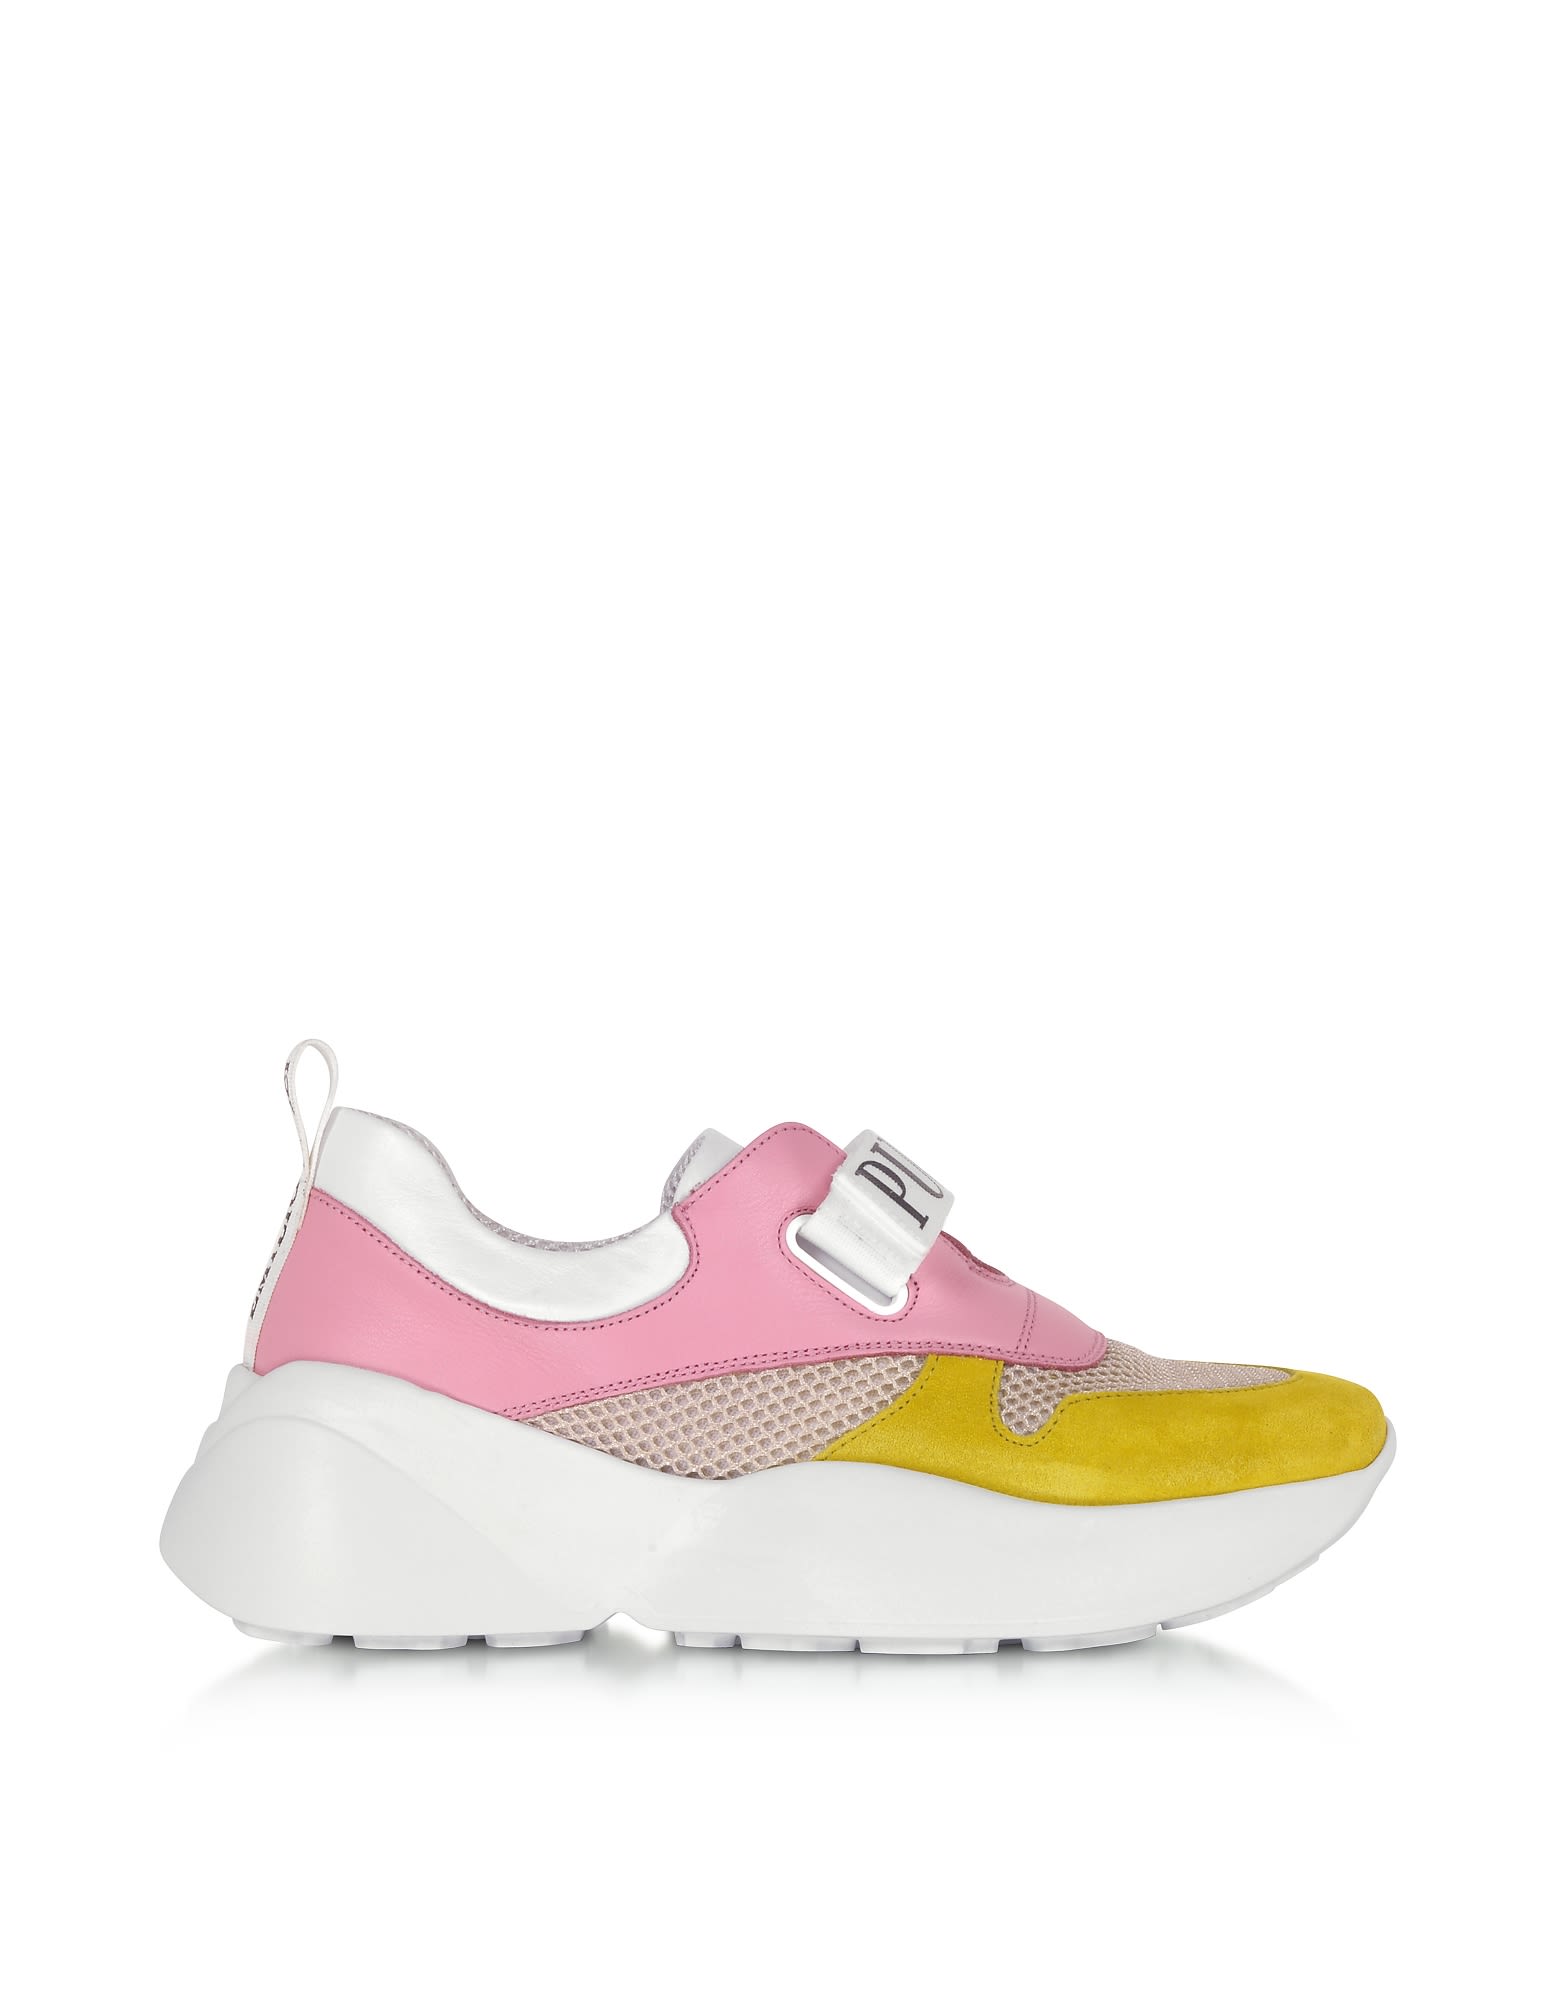 Emilio Pucci Pink & Lime Green Leather And Nylon Sneakers